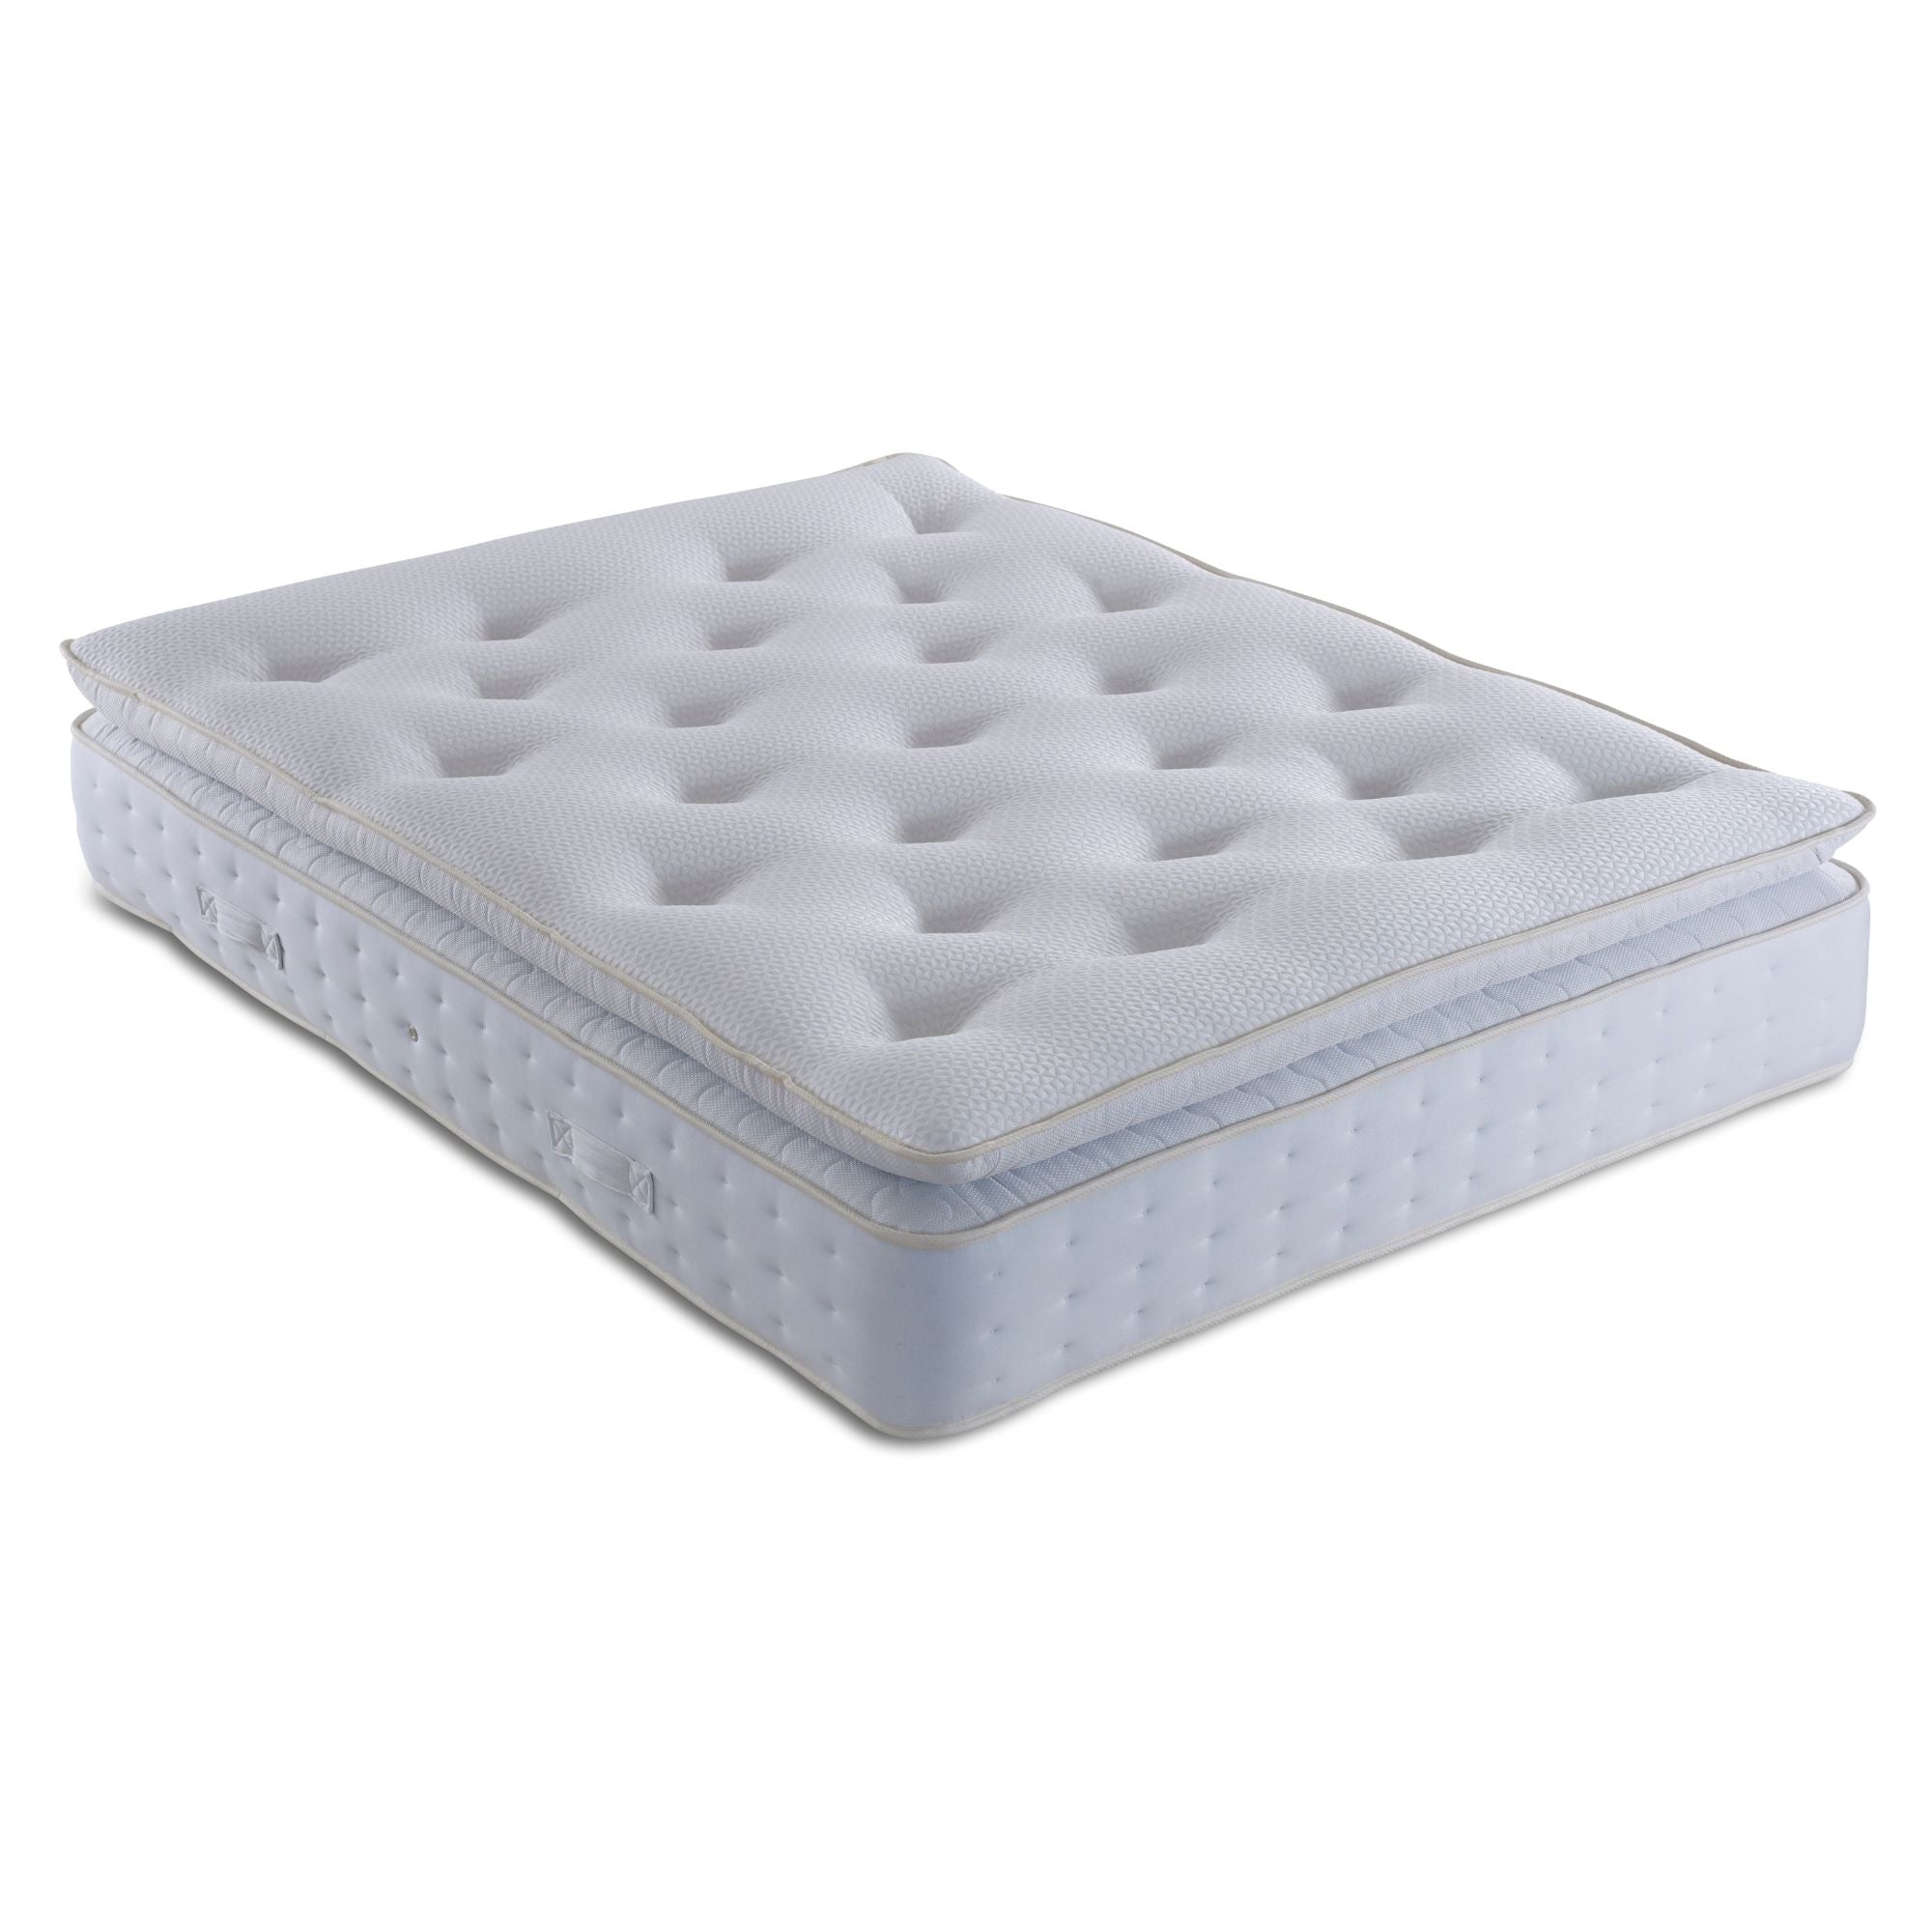 Wide Range of Double Mattresses at BedKings - Affordable and Comfortable